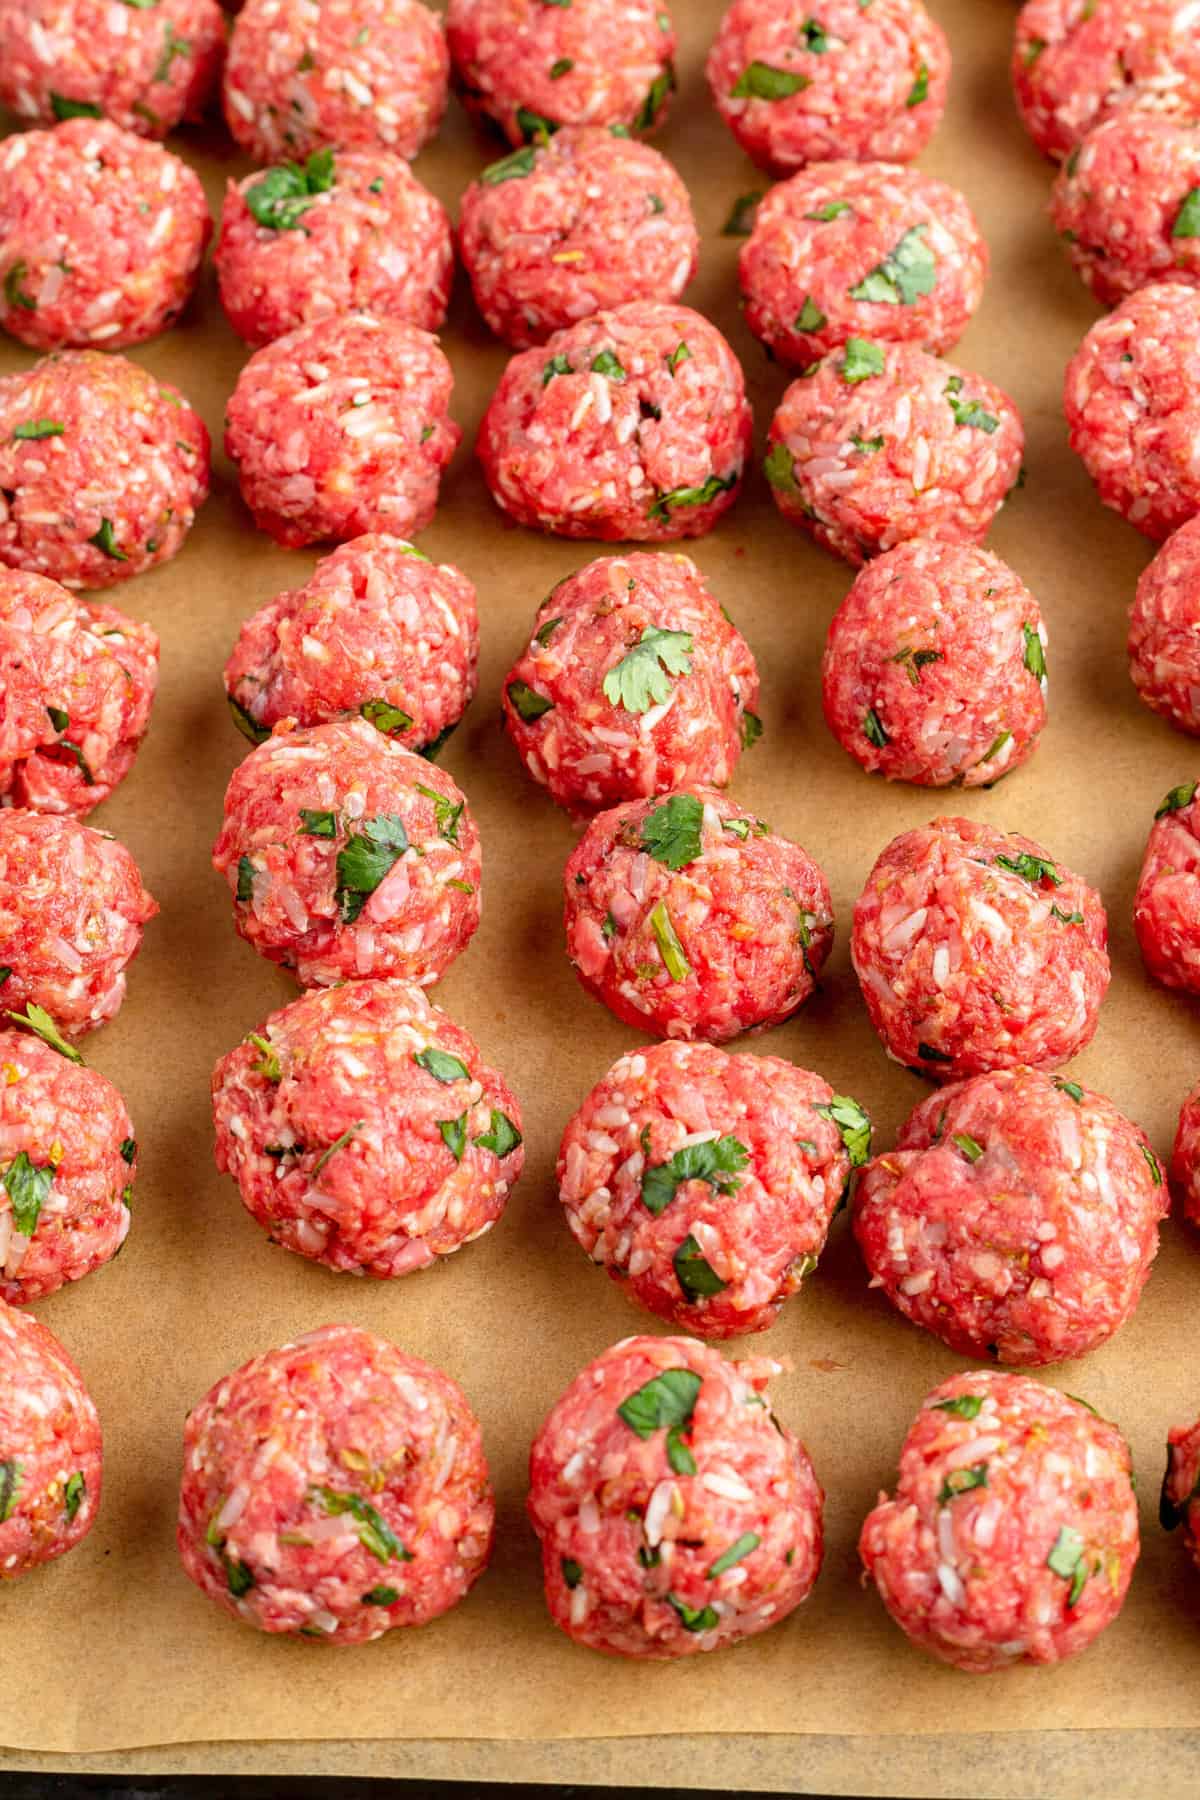 Raw meatballs are placed on a baking sheet.